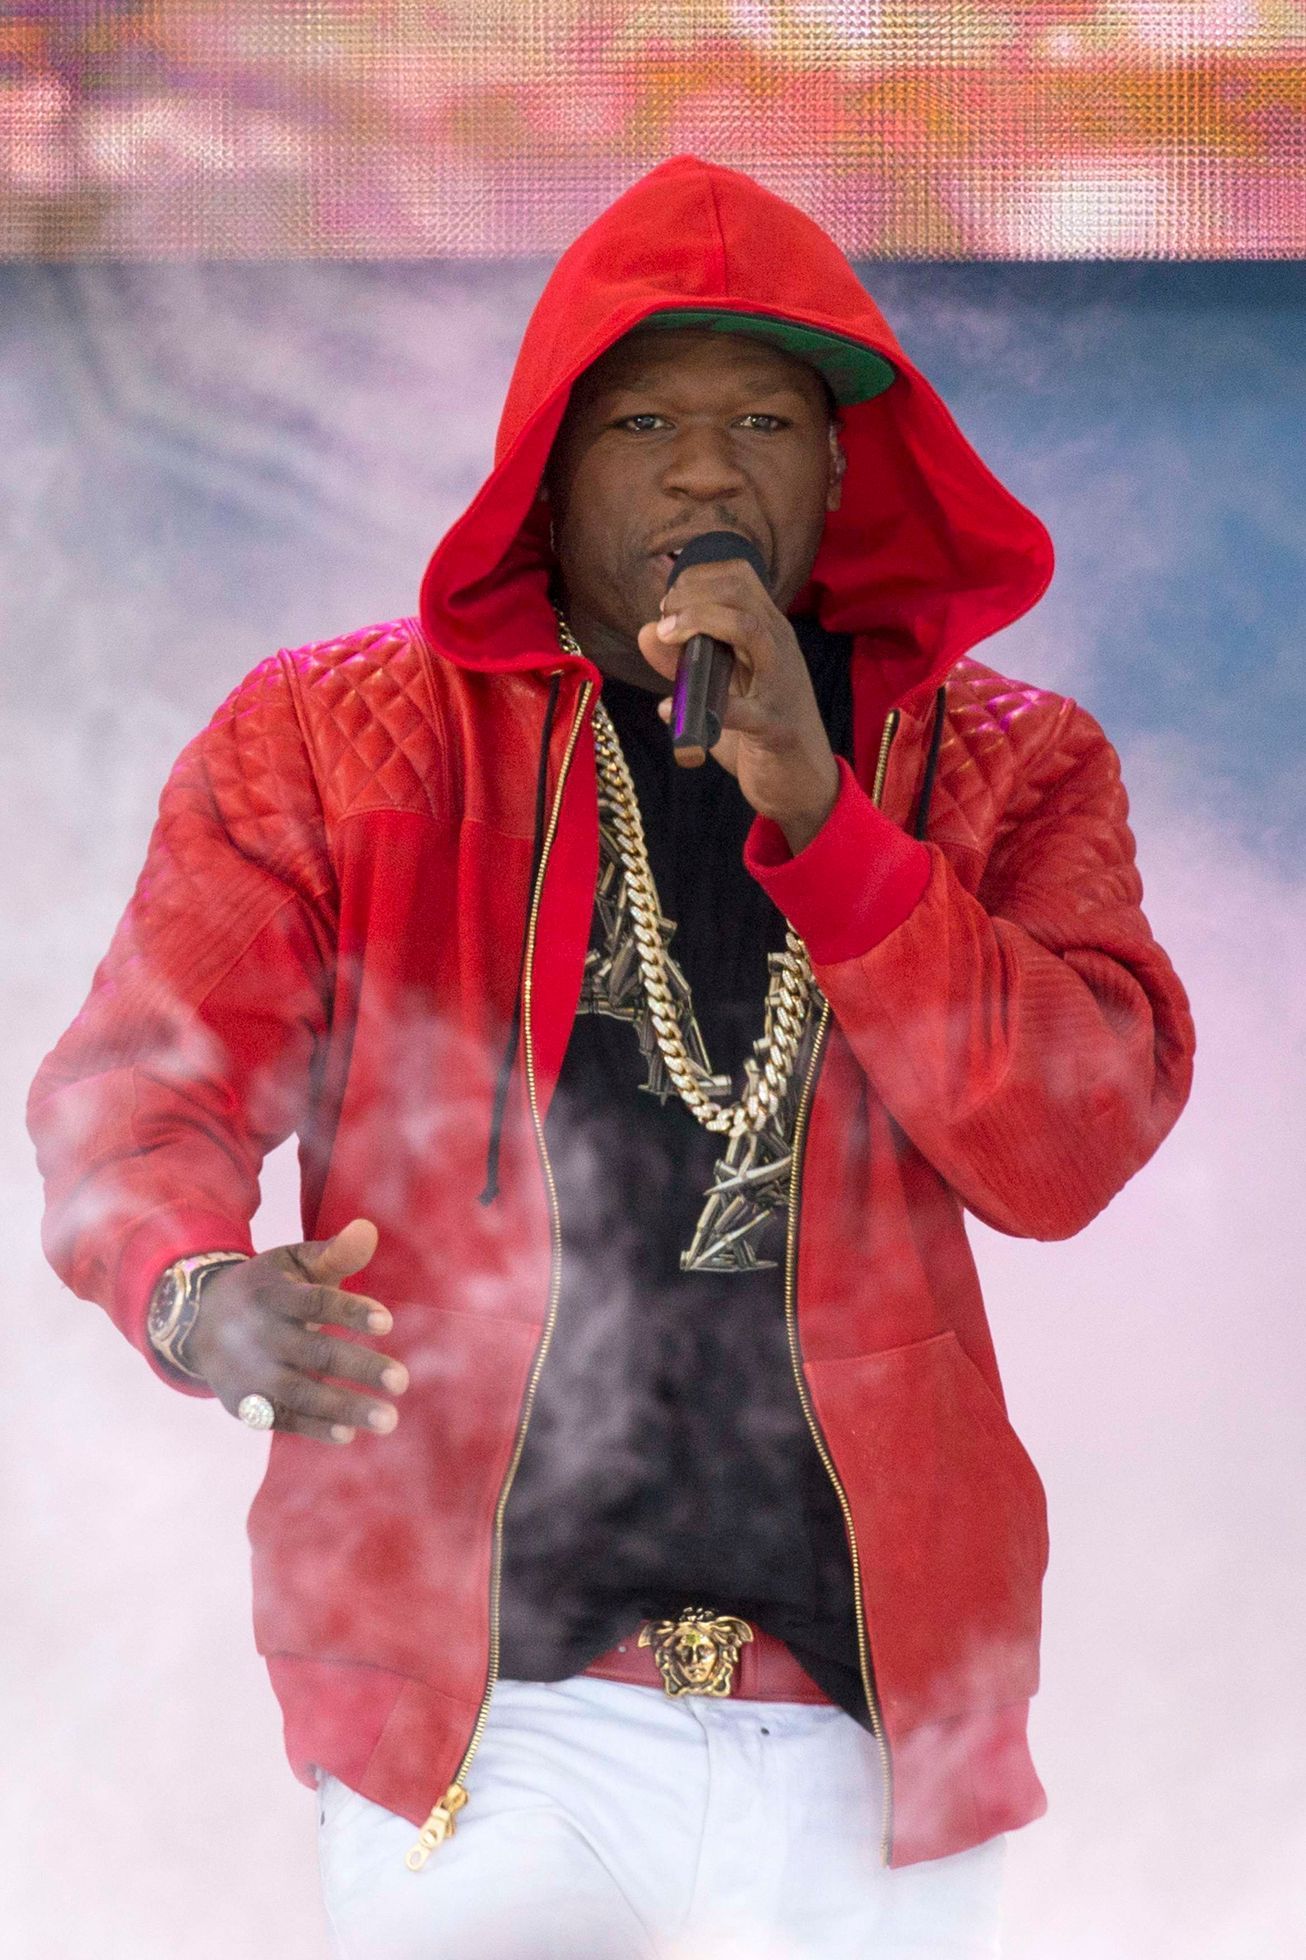 50 Cent performs on Good Morning America's Summer Concert Series in New York City's Central Park